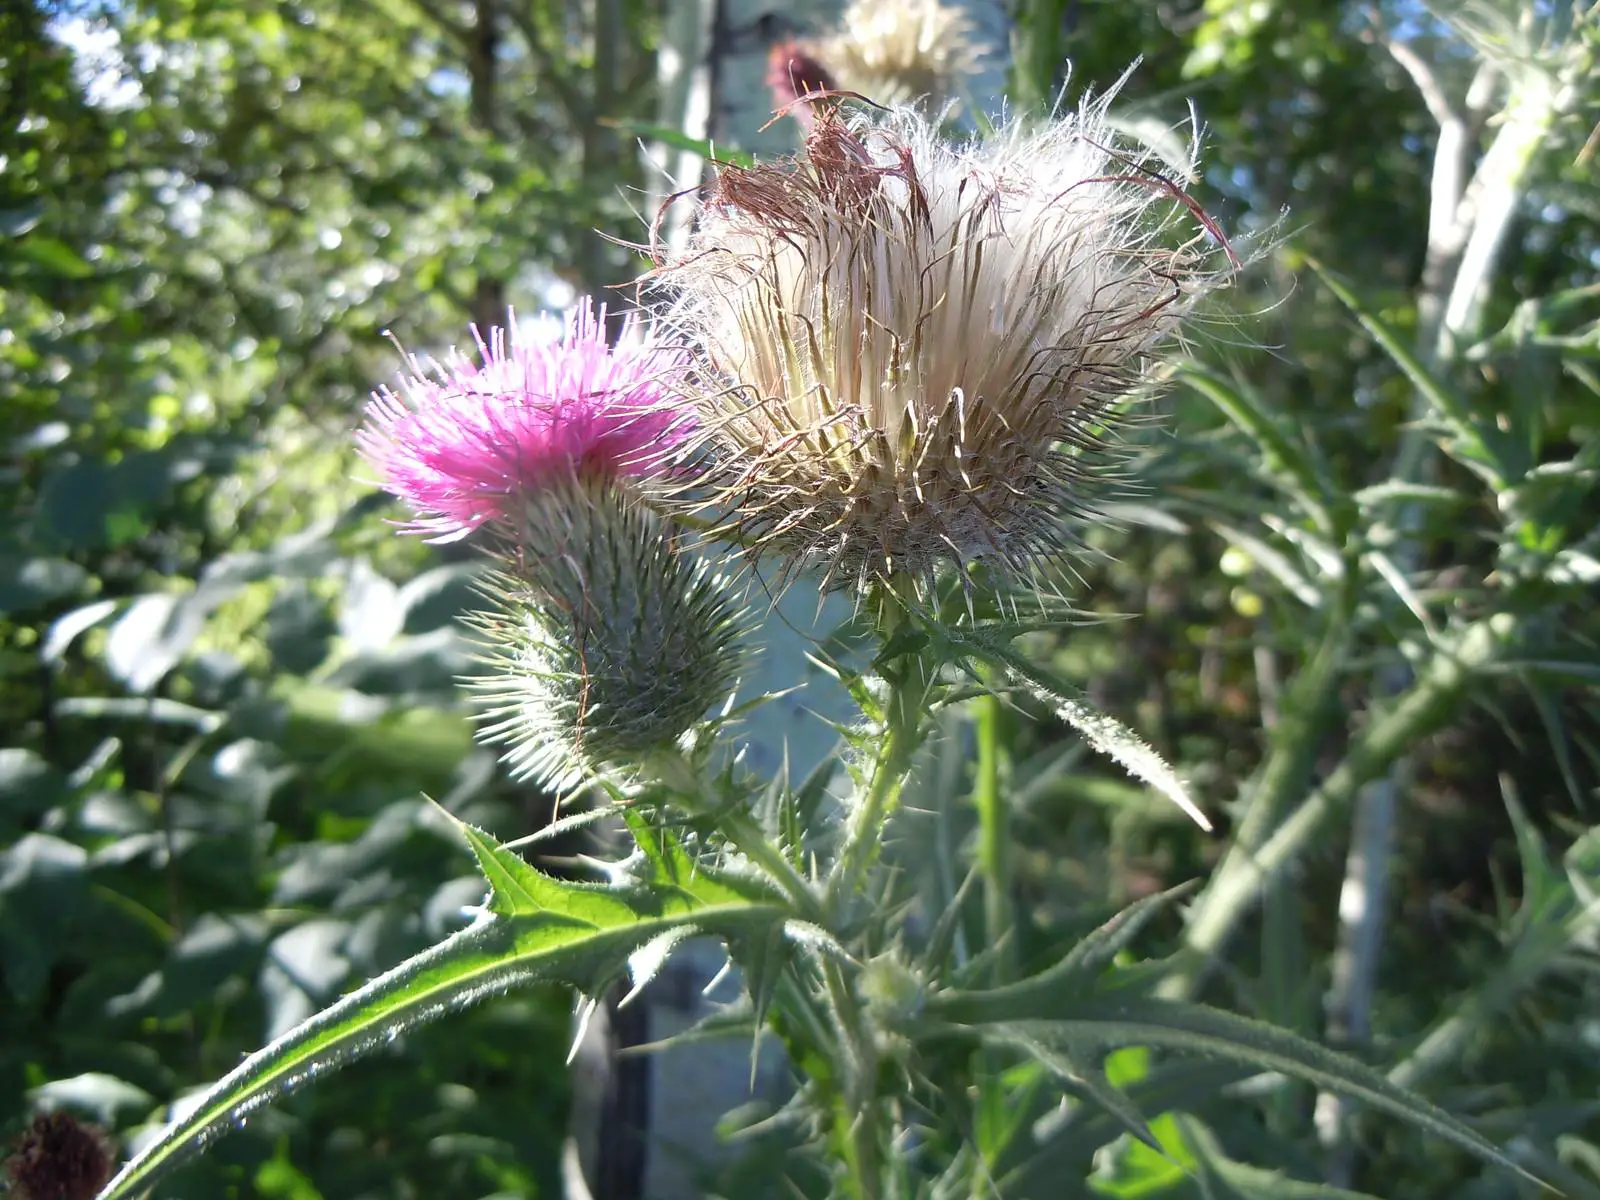 Bull thistle about to flower and seed